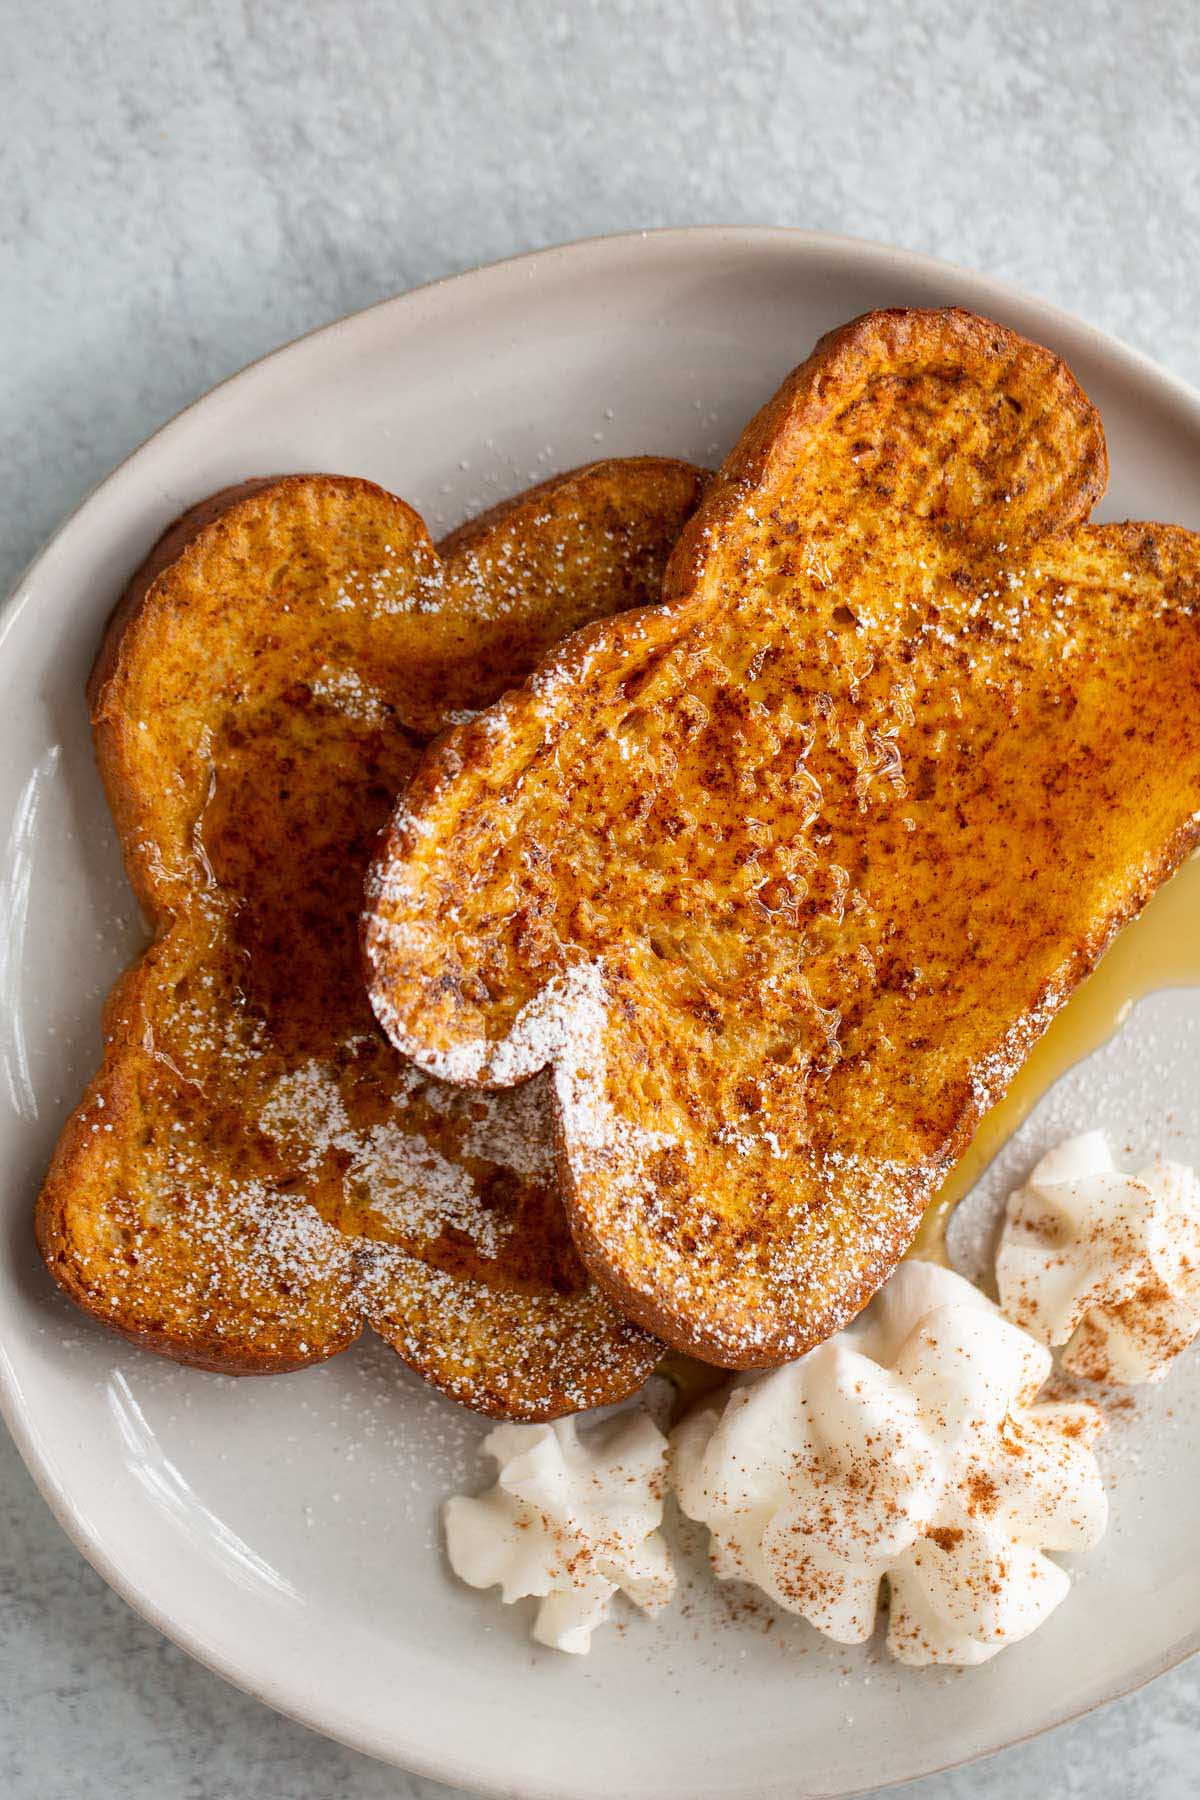 Pumpkin French toast on a plate with whipped cream and syrup.